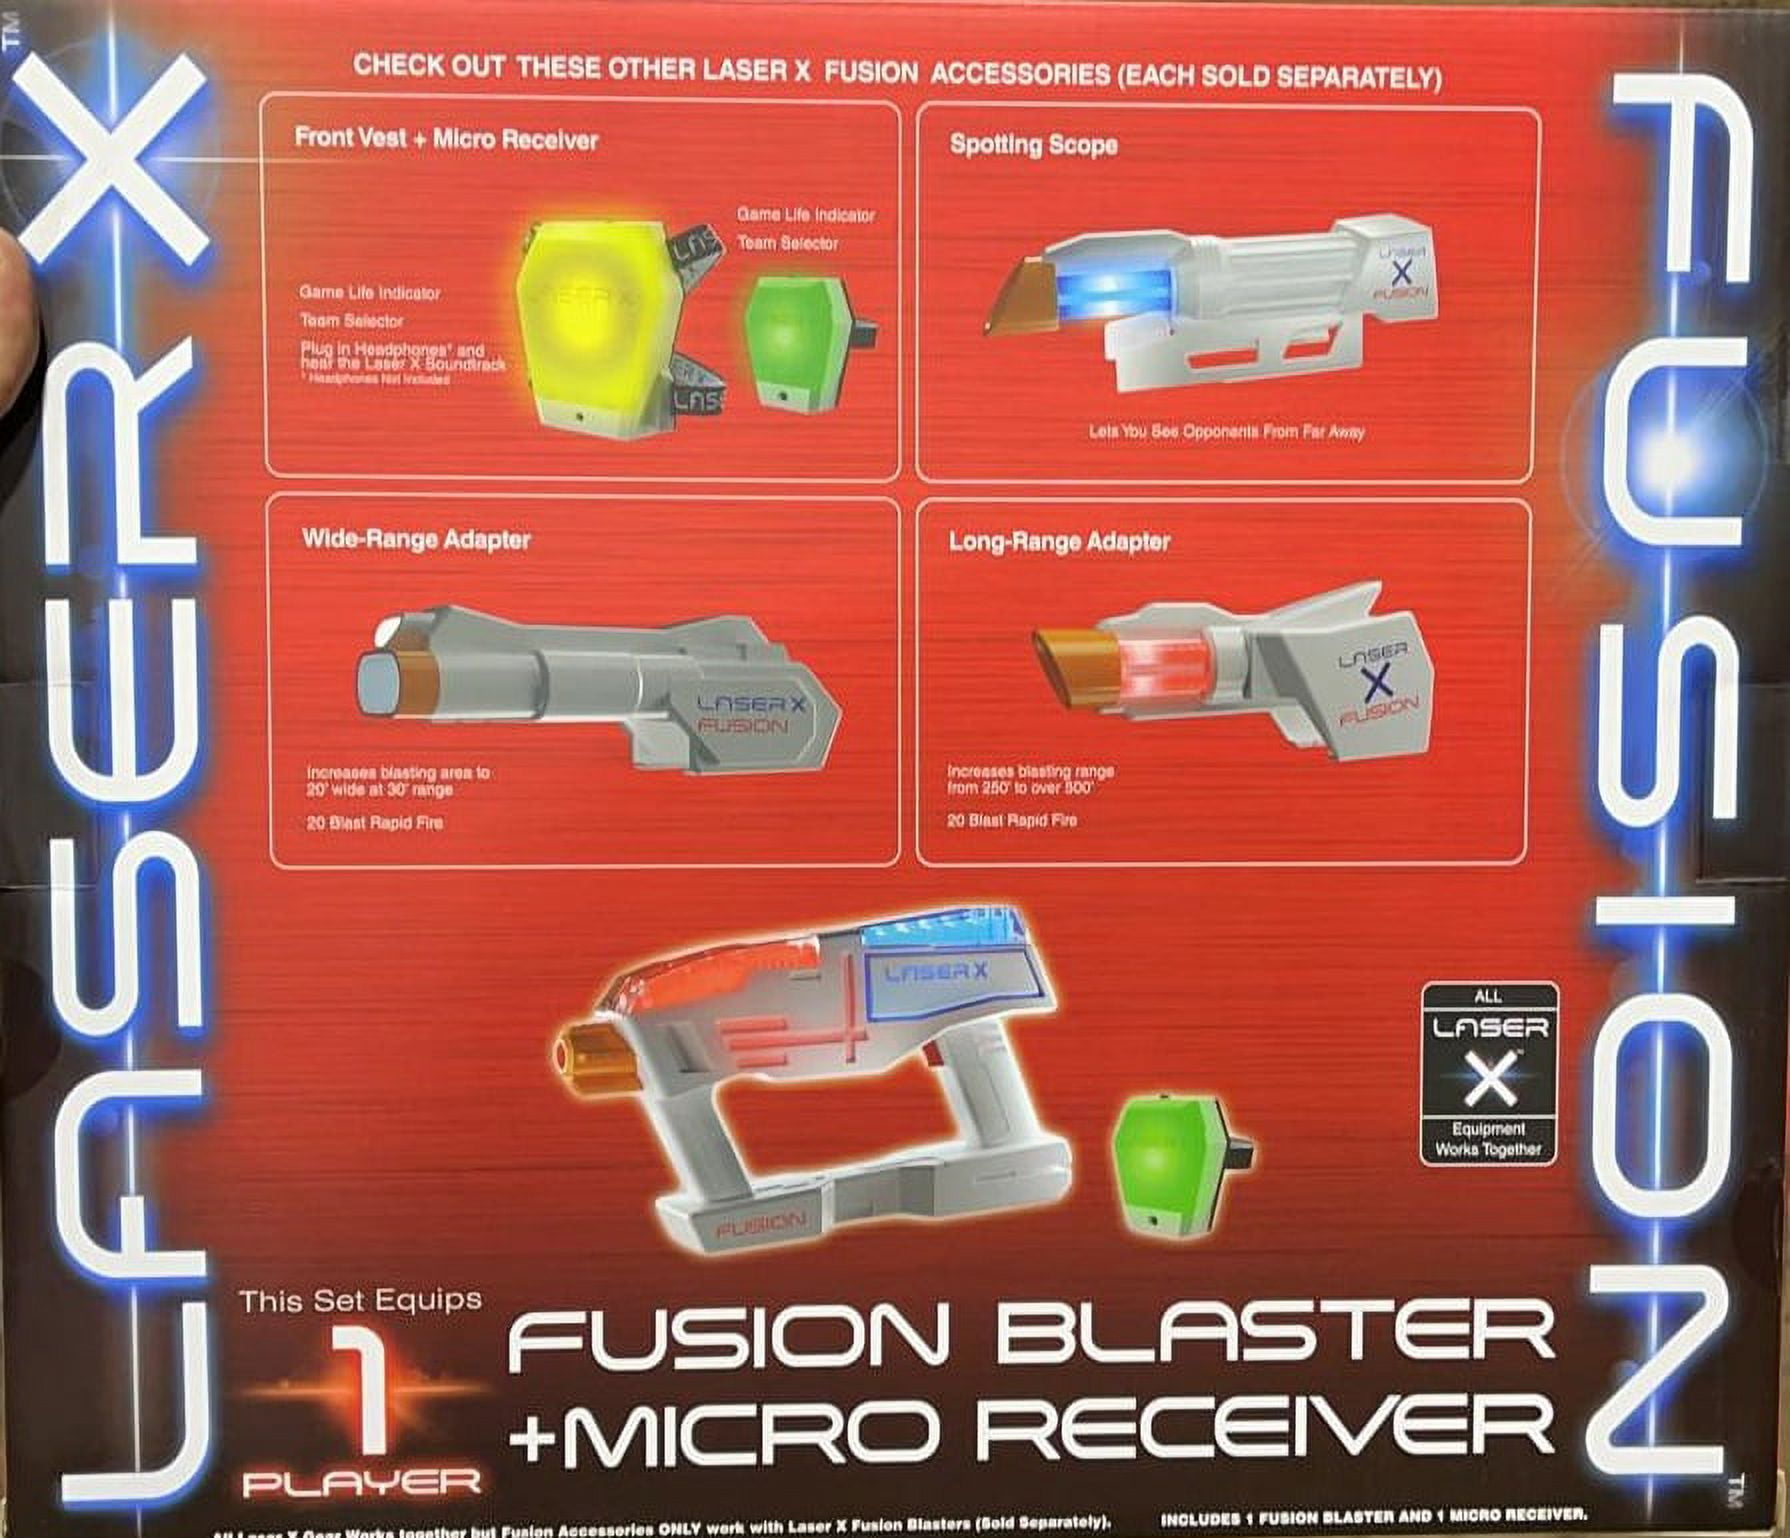 at - X One Outdoor Player Blaster x Micro Blaster - 2 Entertainment Feet Range Wide Laser - Toy 30 20 Fun Fusion Receiver, Pack + Pck or Each Home for